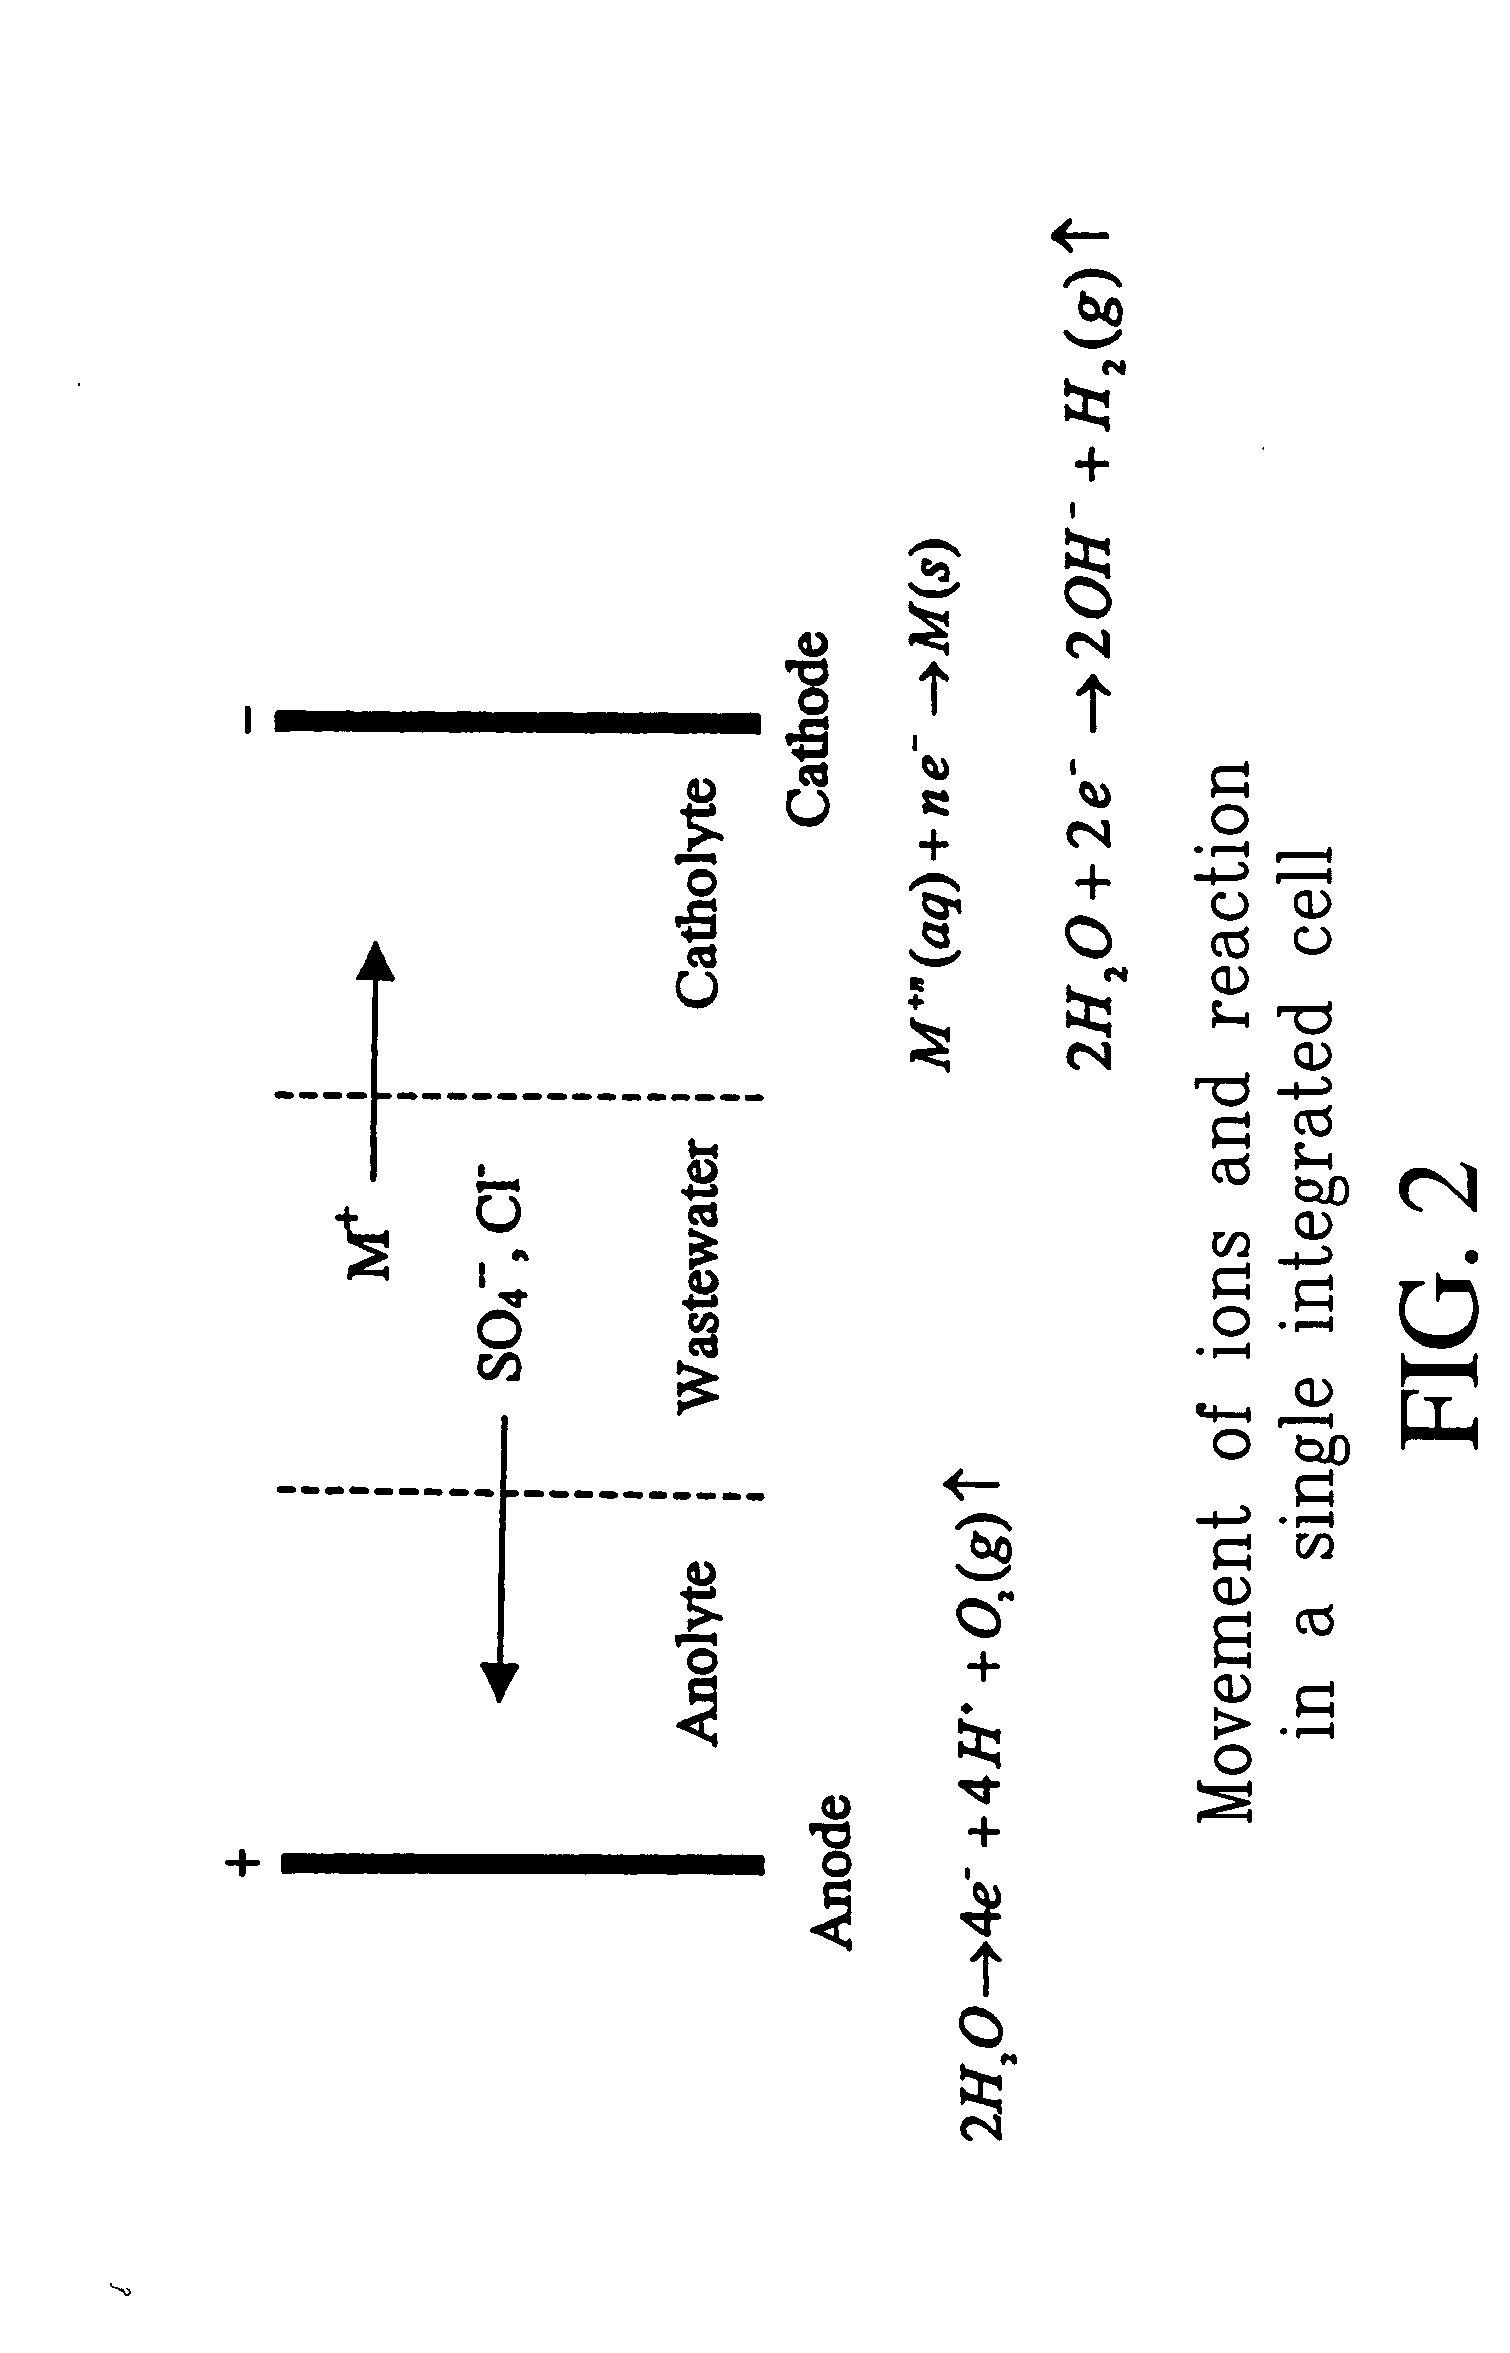 Integrated electrolytic-electrodialytic apparatus and process for recovering metals from metal ion-containing waste streams